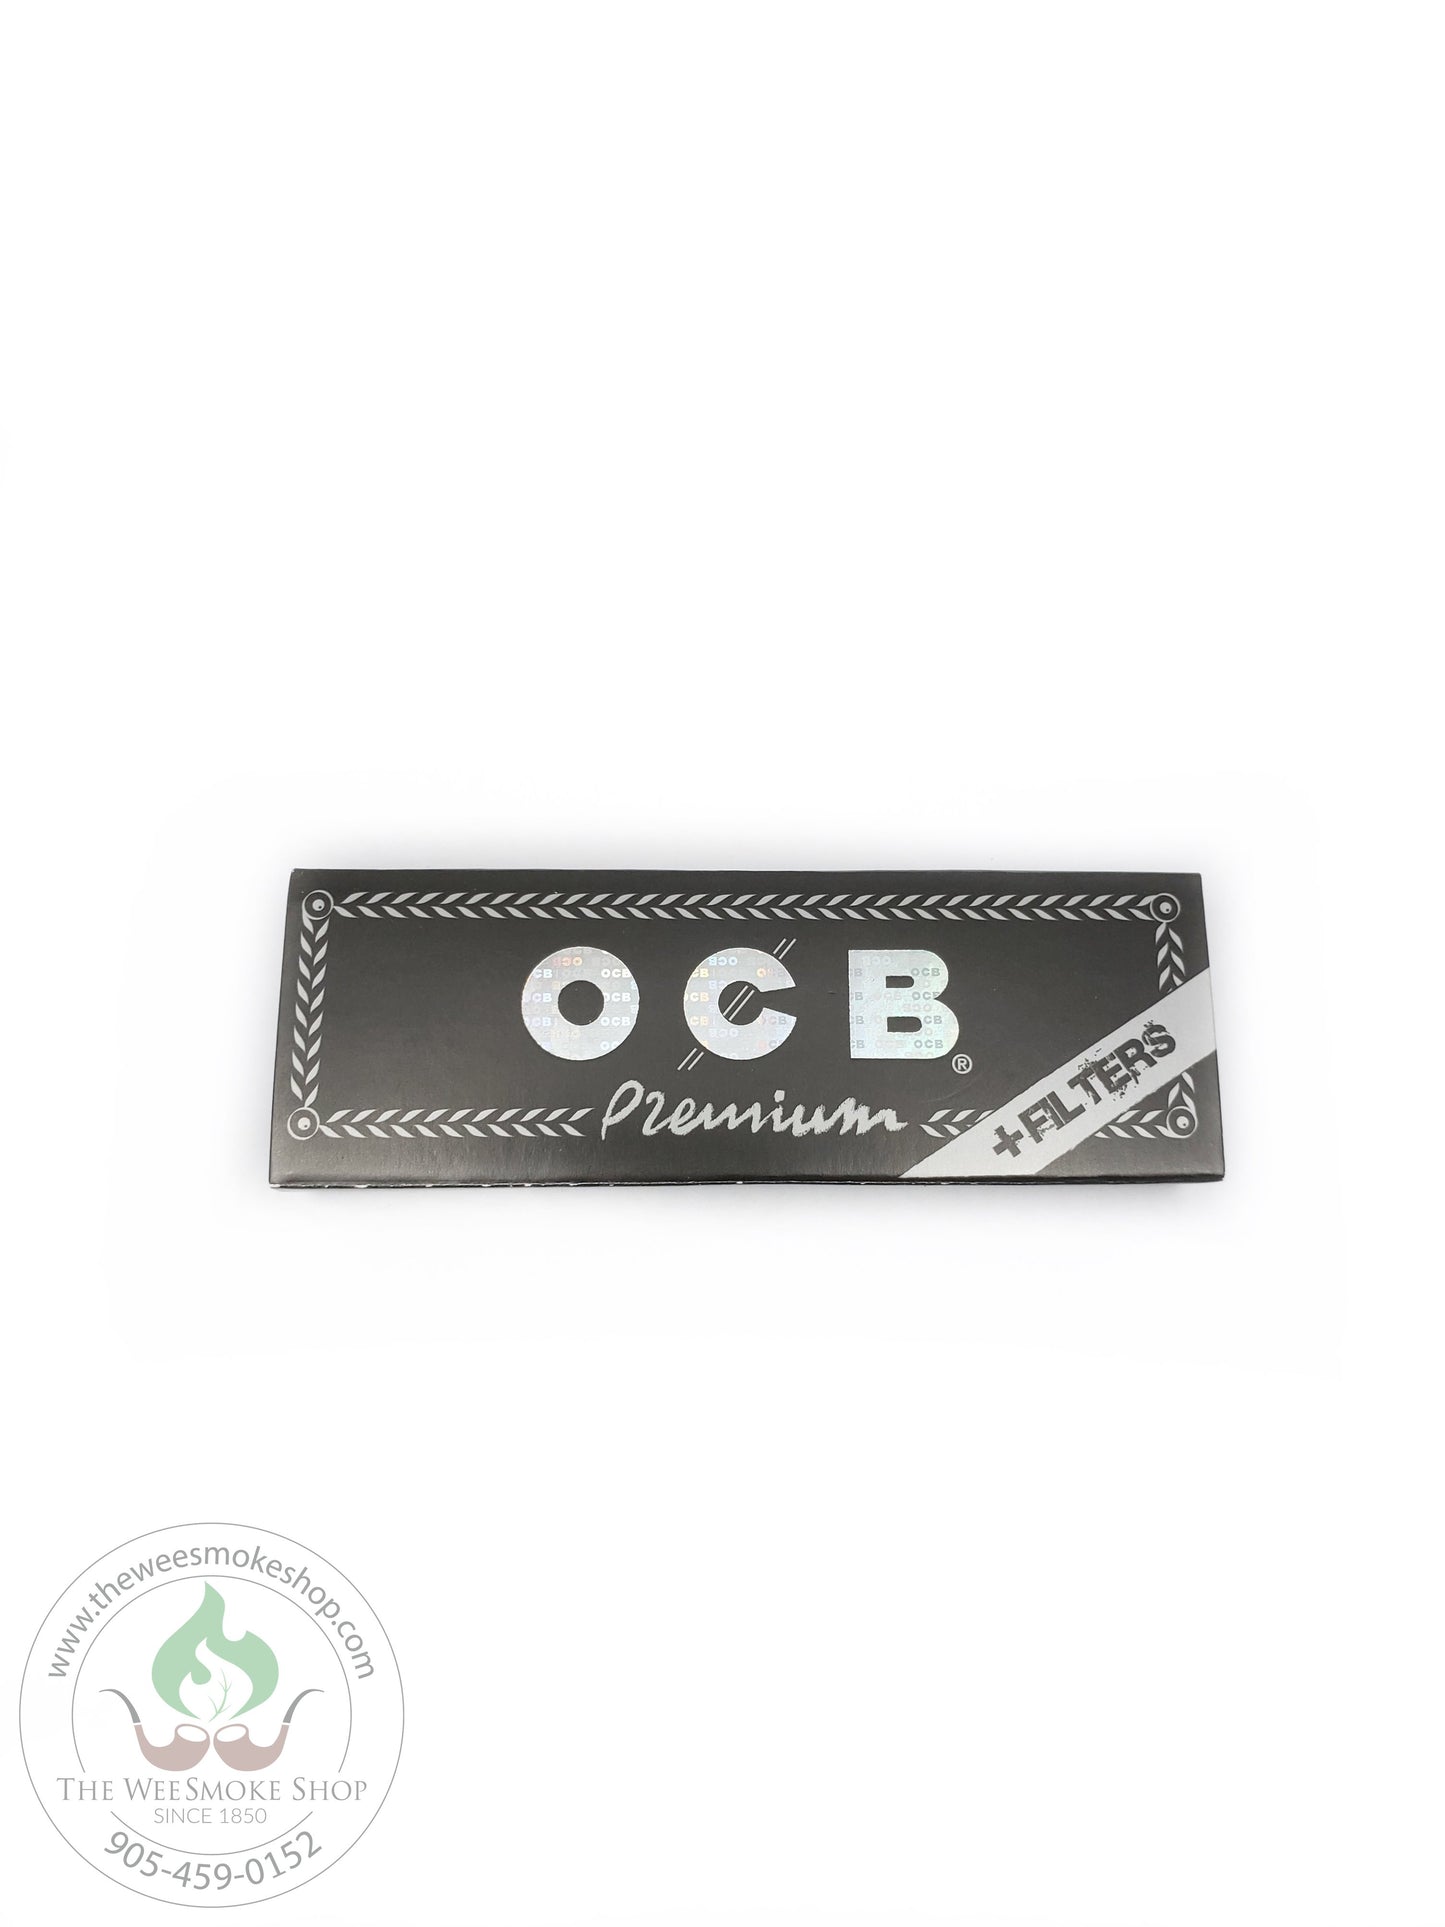 OCB Premium Black Rolling Papers & Tips. 1 1/4 size. The Wee Smoke Shop